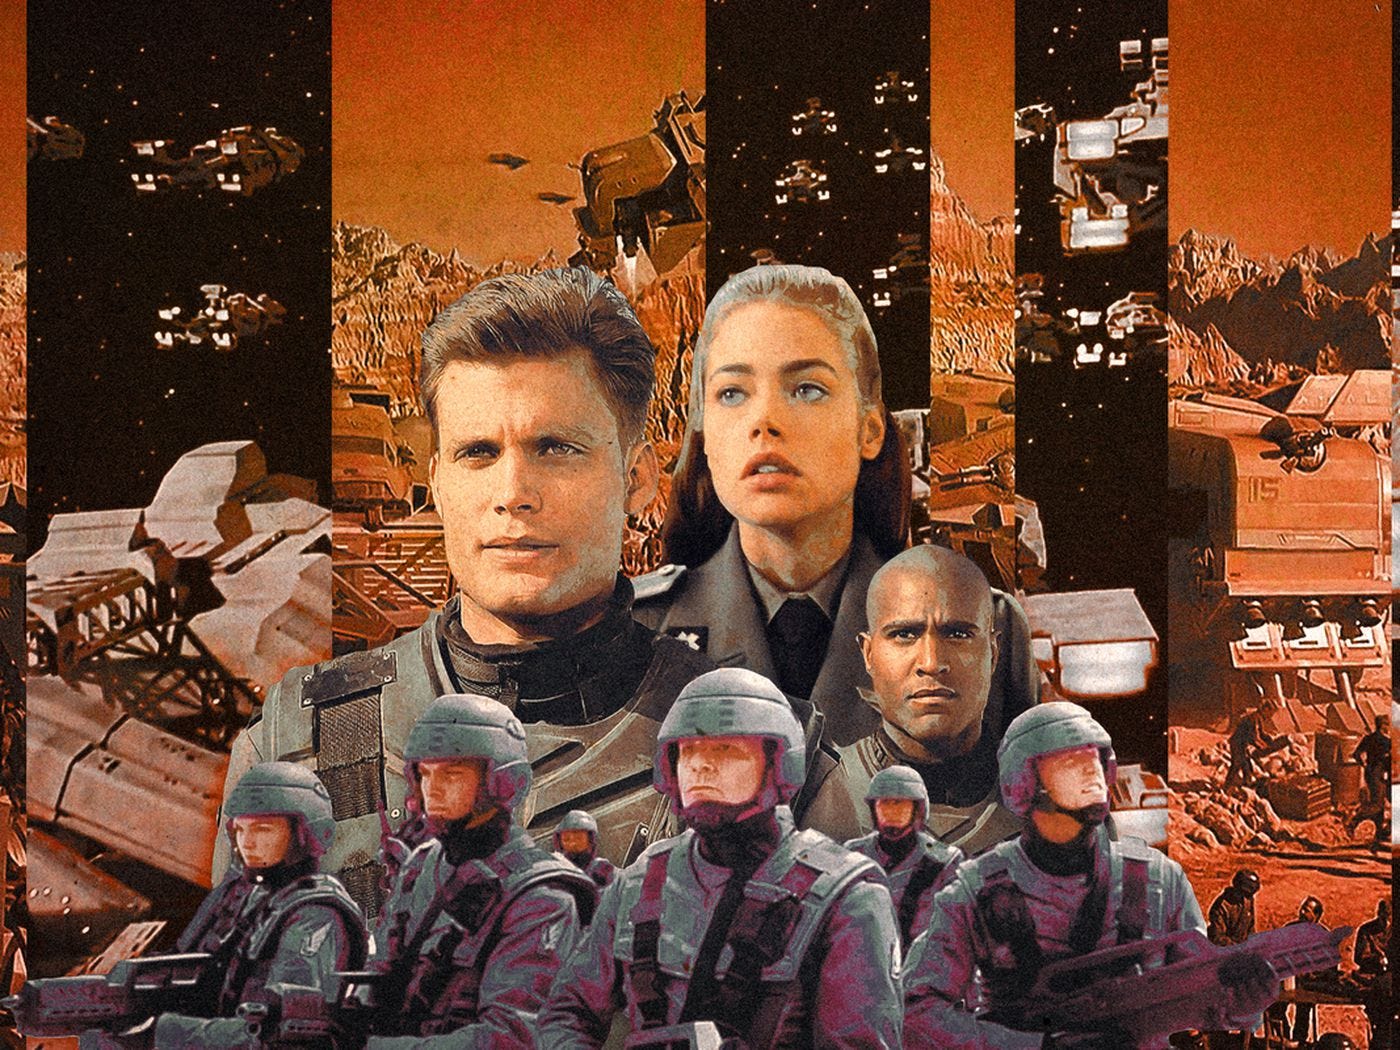 Starship Troopers' at 25: a Cult Classic Ahead of the Curve - The Ringer